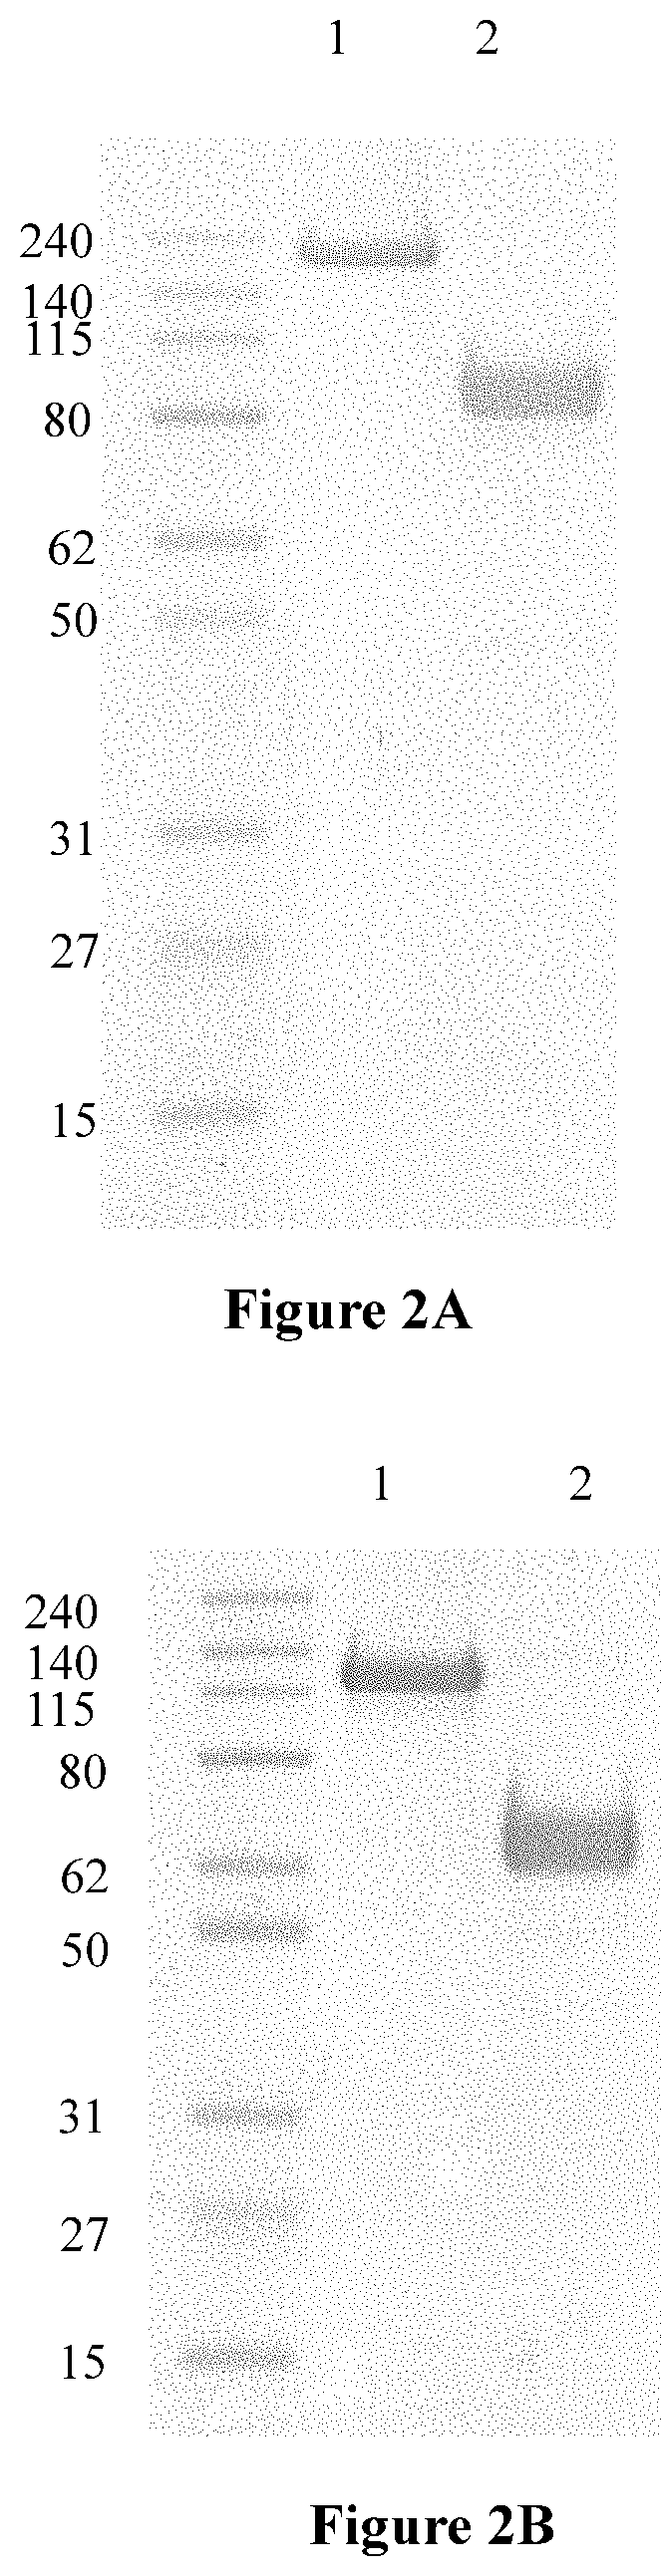 Anti-angiogenesis fusion protein and uses thereof